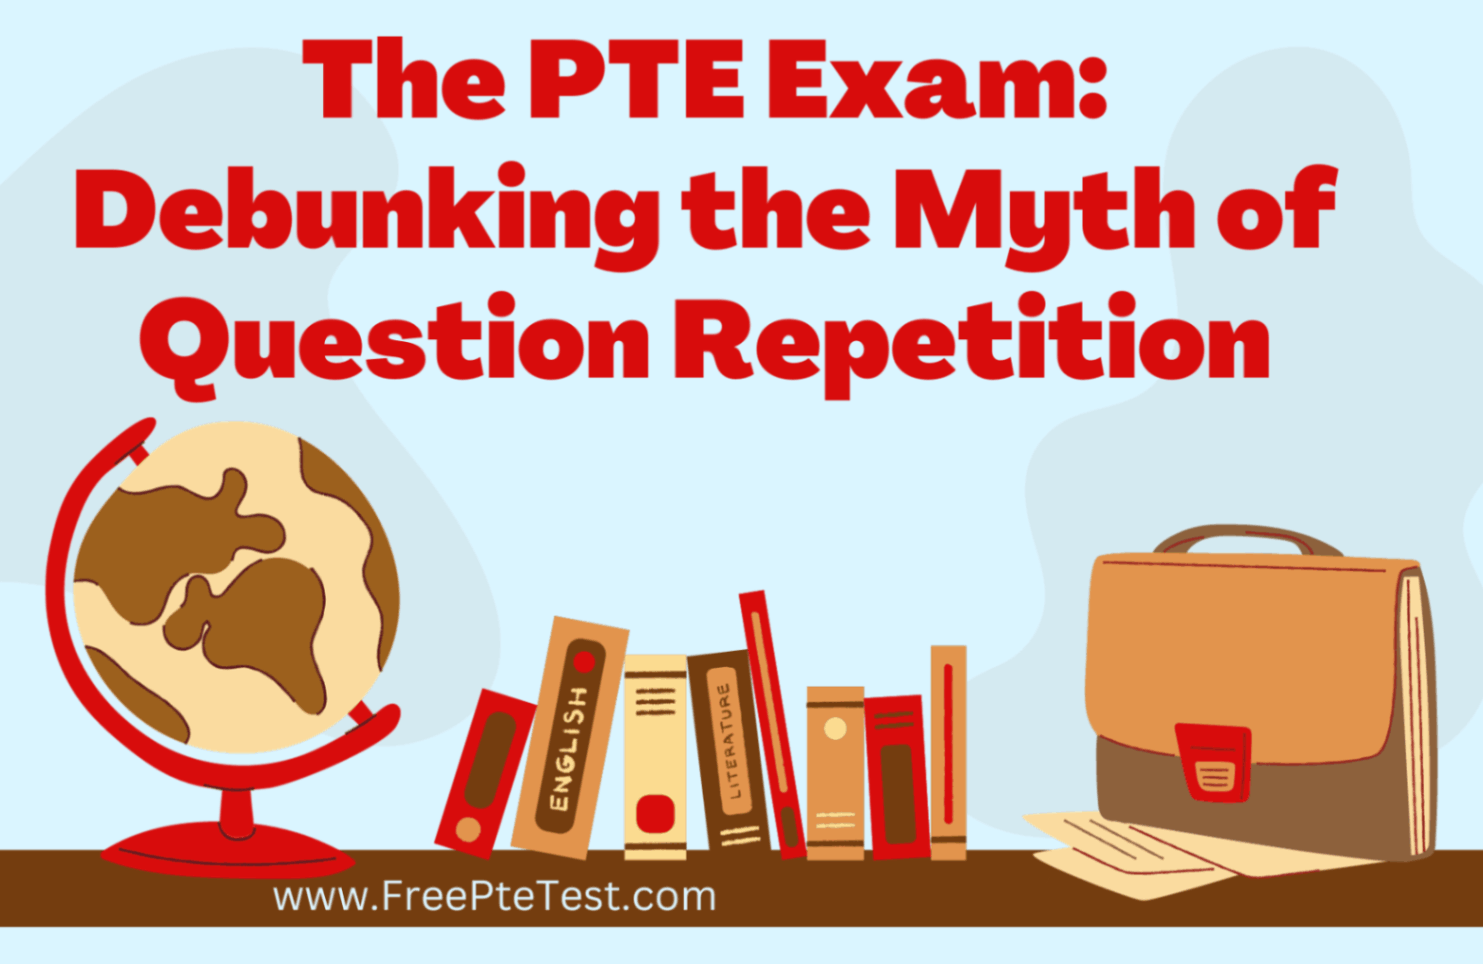 You are currently viewing The PTE Exam: Debunking the Myth of Question Repetition